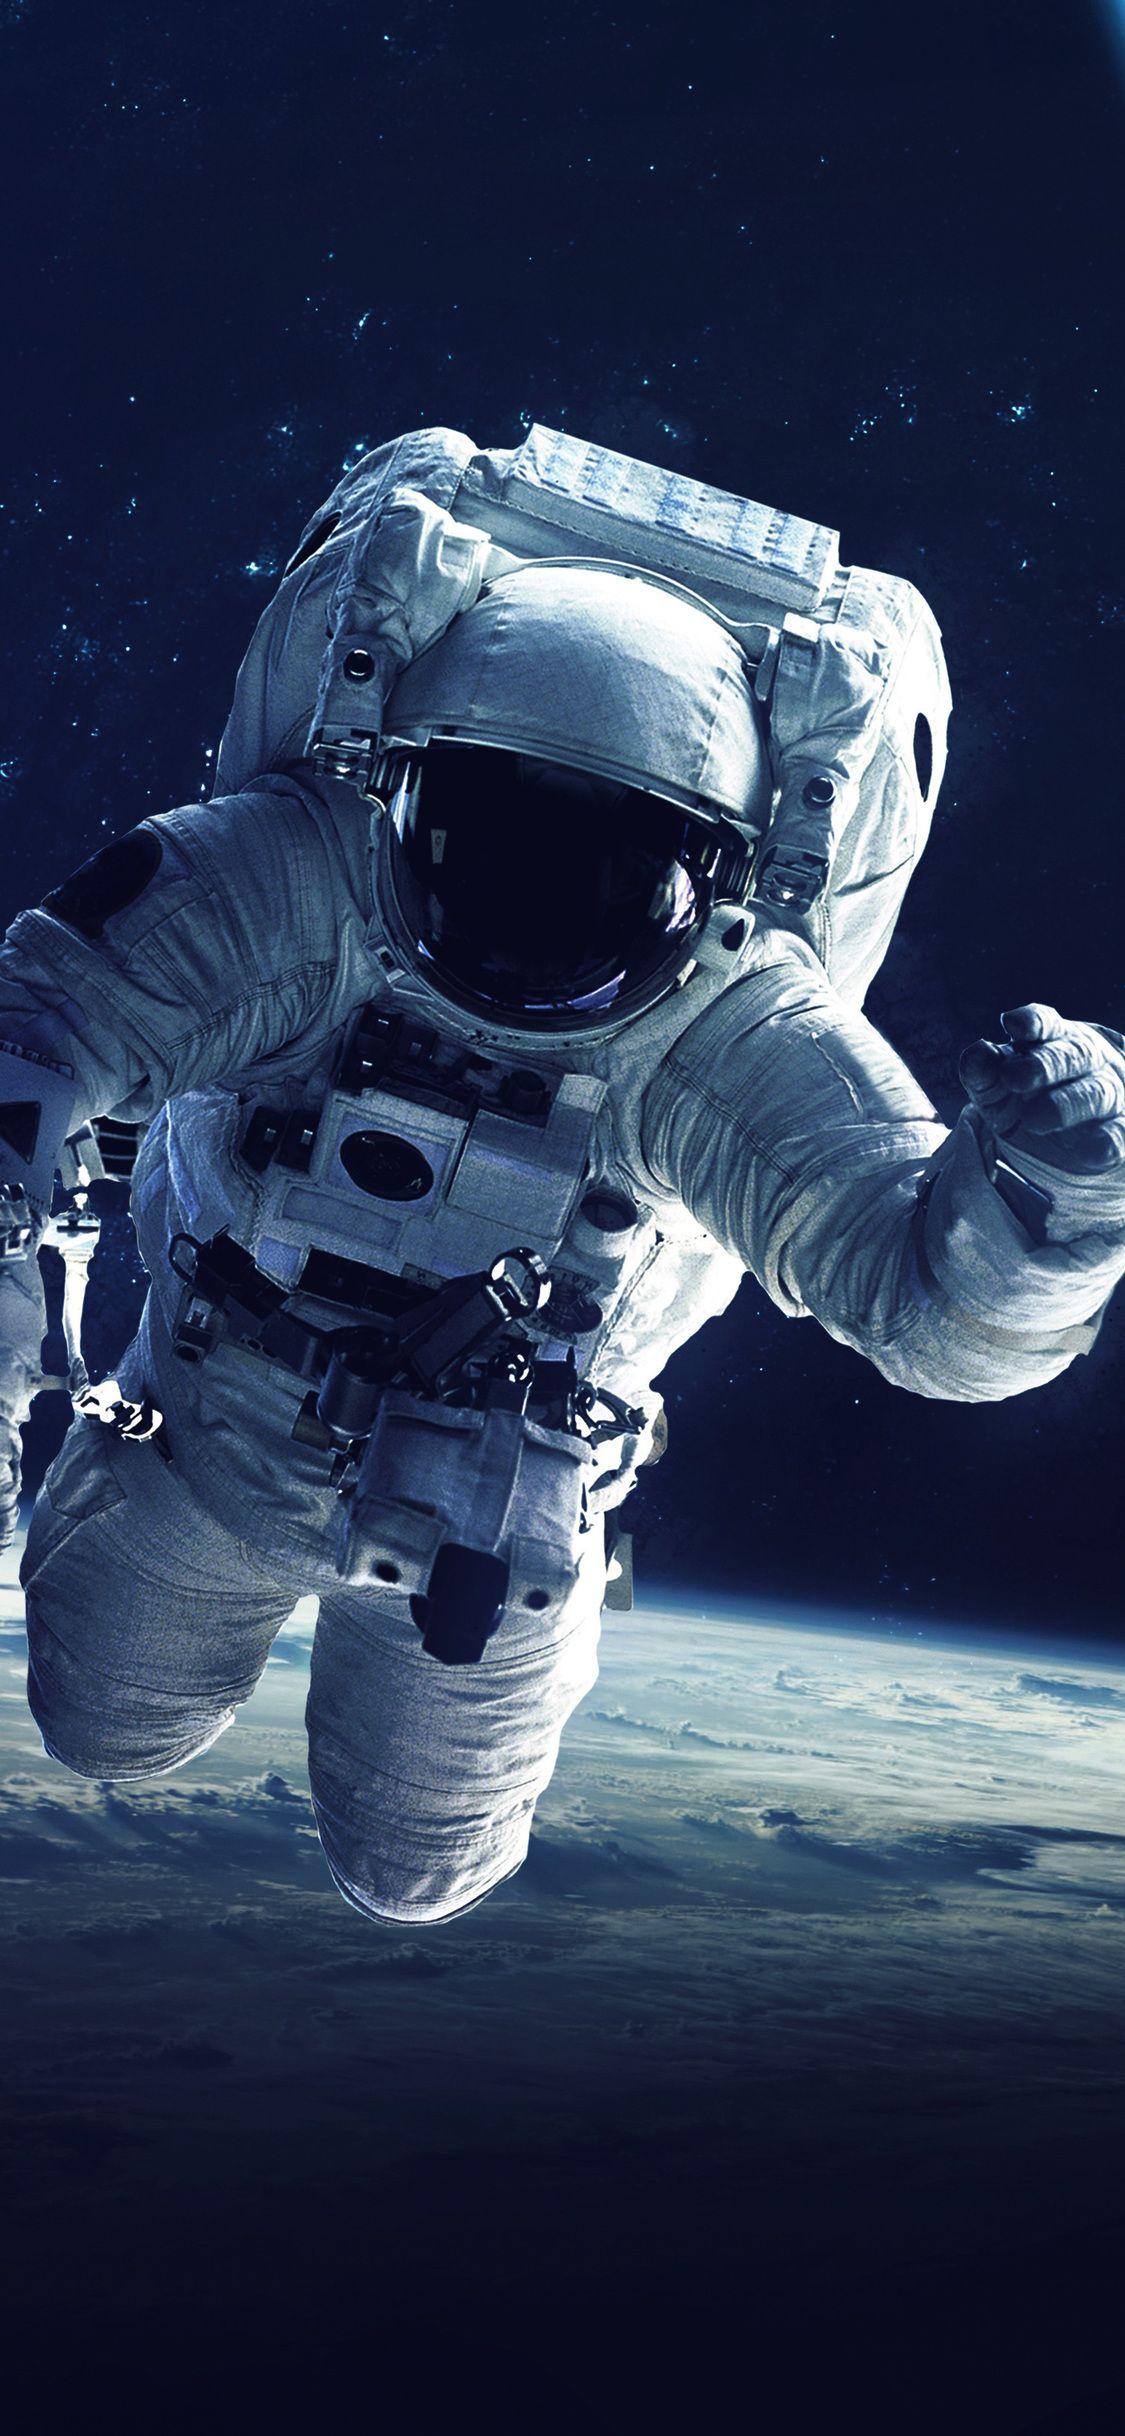 Astronaut 5k iPhone XS, iPhone iPhone X HD 4k Wallpaper, Image, Background, Photo and Picture. Astronaut wallpaper, Wallpaper space, Space artwork